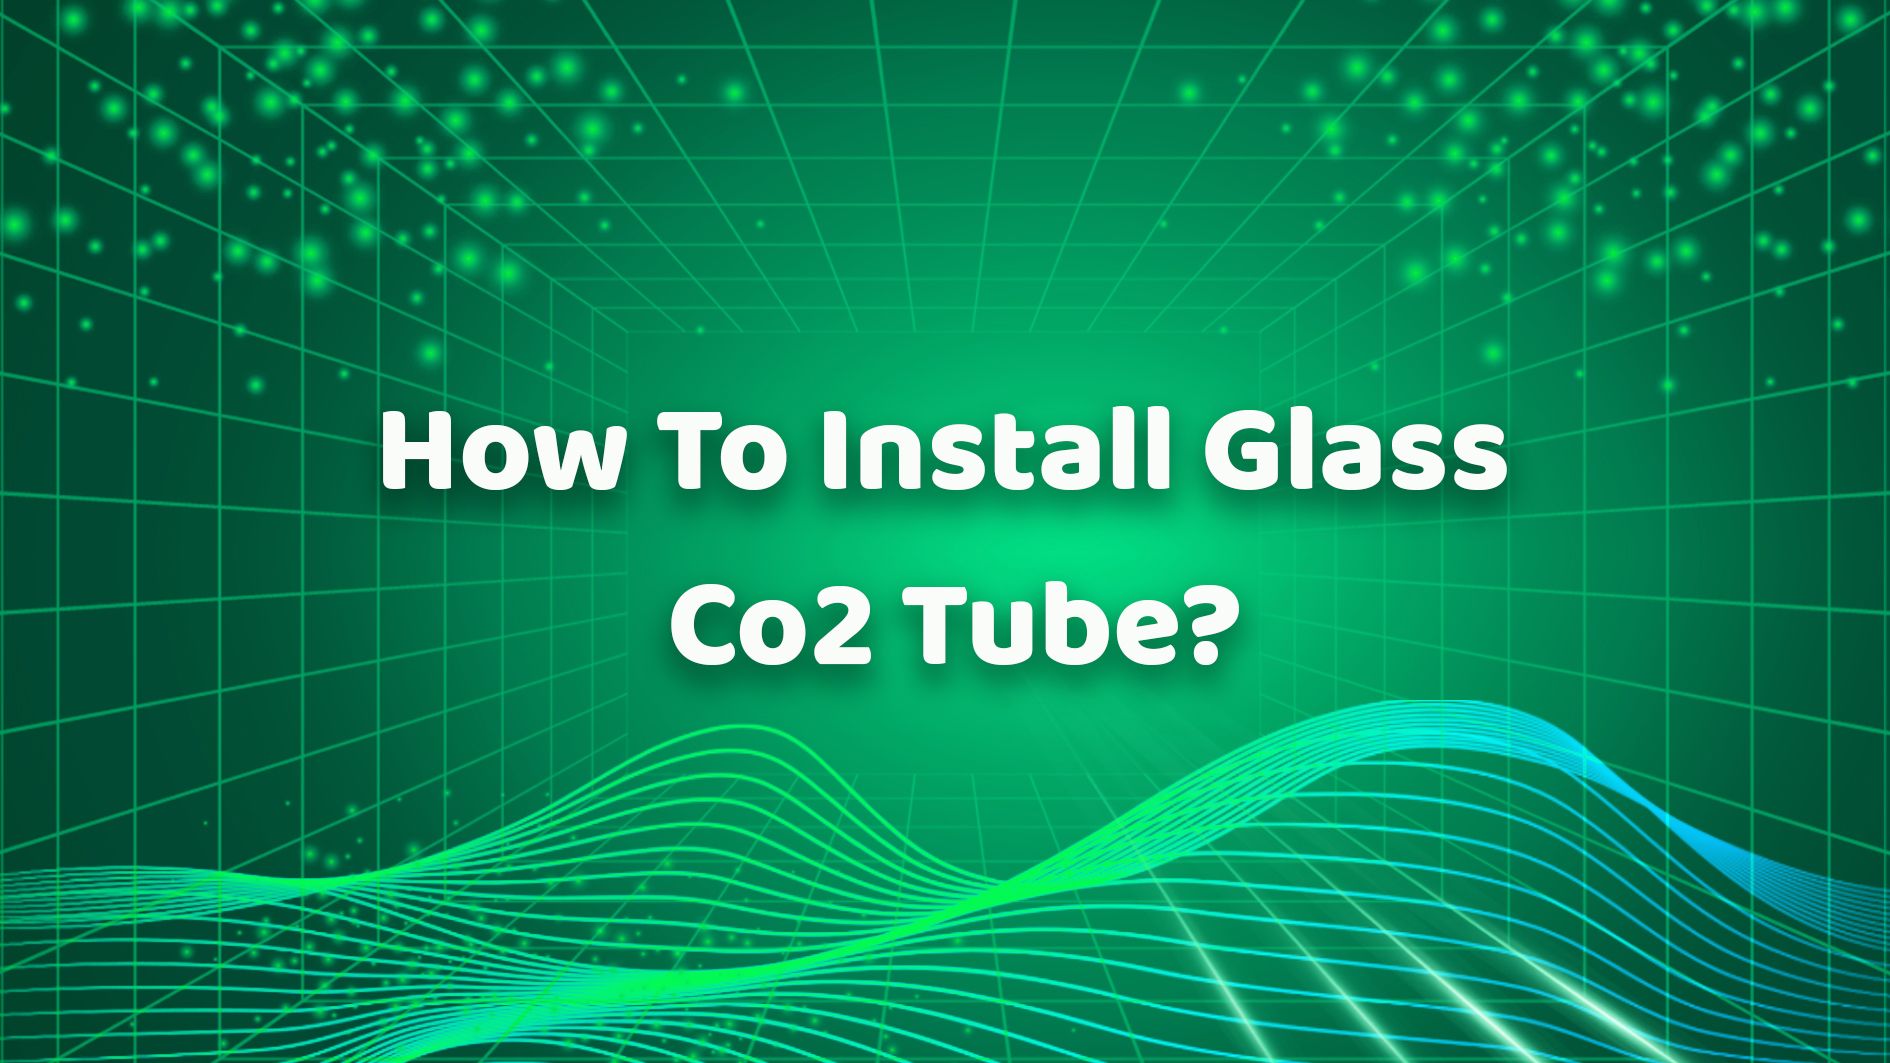 How To Install Glass Co2 Tube？